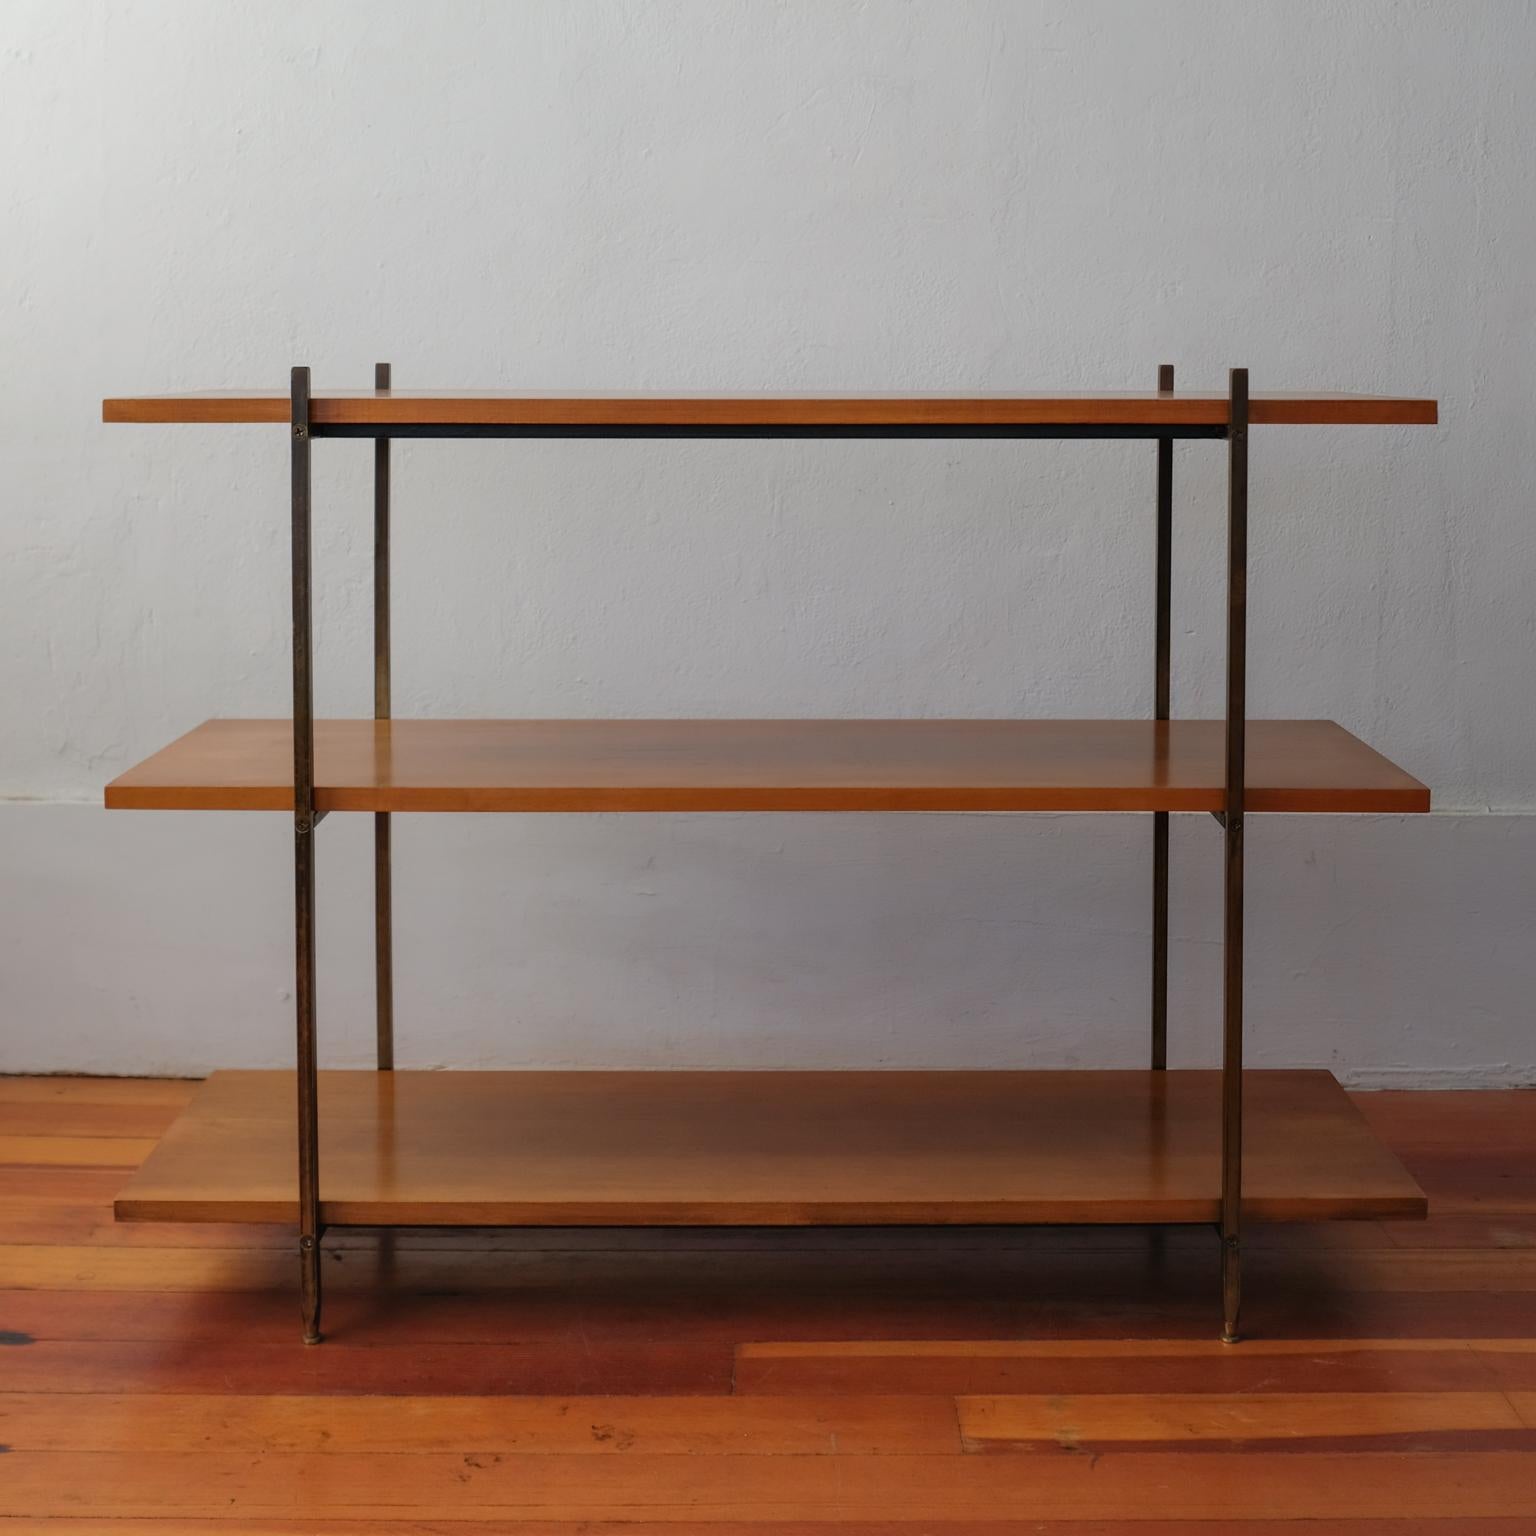 Milo Baughman for Murray Furniture shelf/room divider. Solid brass frame with adjustable feet for leveling. Solid wood shelves. Refined construction, high quality and heavy unit. In the 1954 Murray Furniture catalog it is called a 3-shelf room